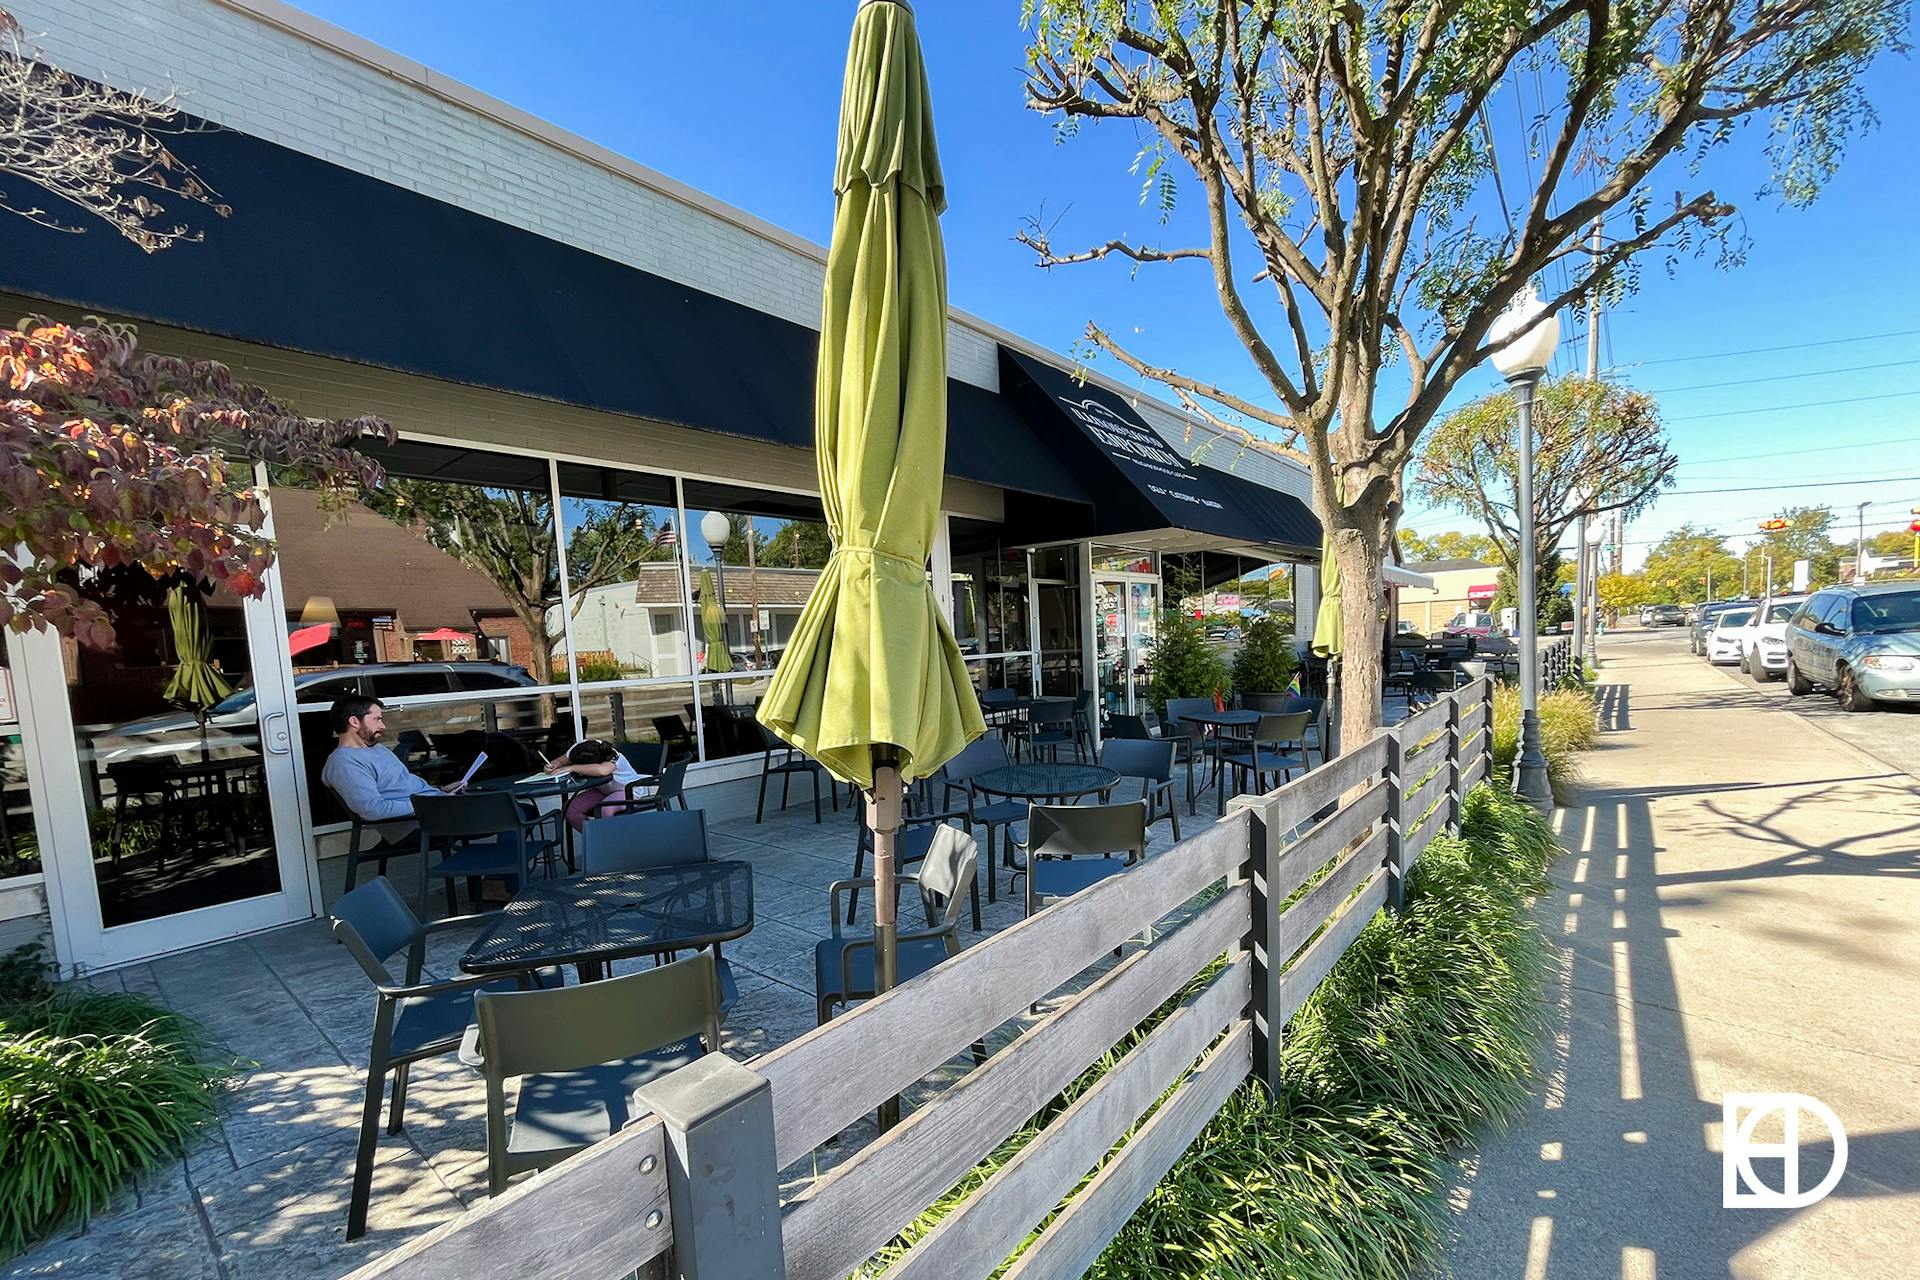 Photo of the exterior and patio of the Illinois Street Food Emporium